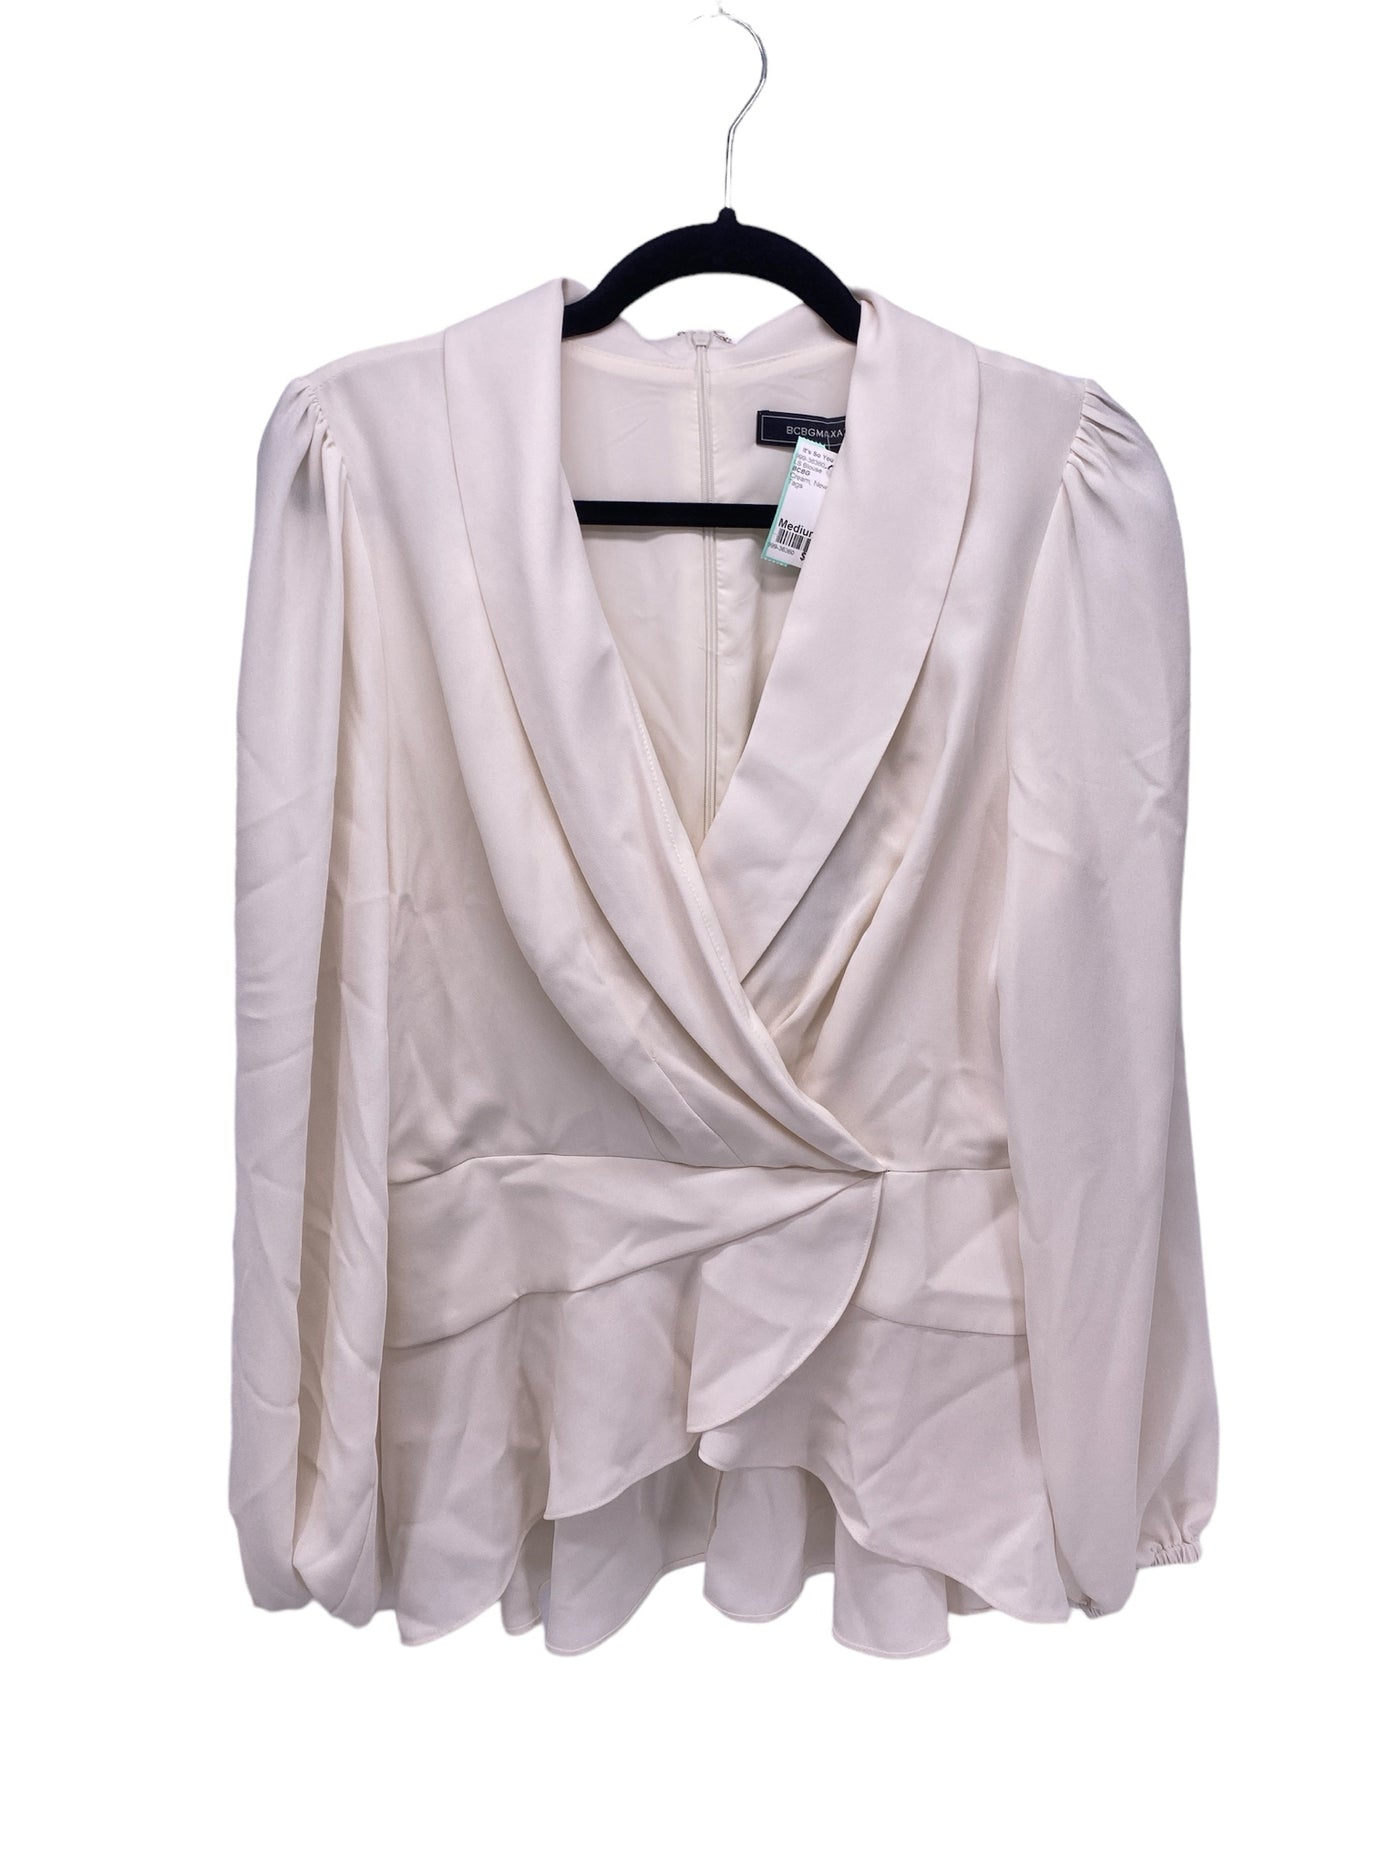 BCBG Misses Size Medium Cream New With Tags LS Blouse